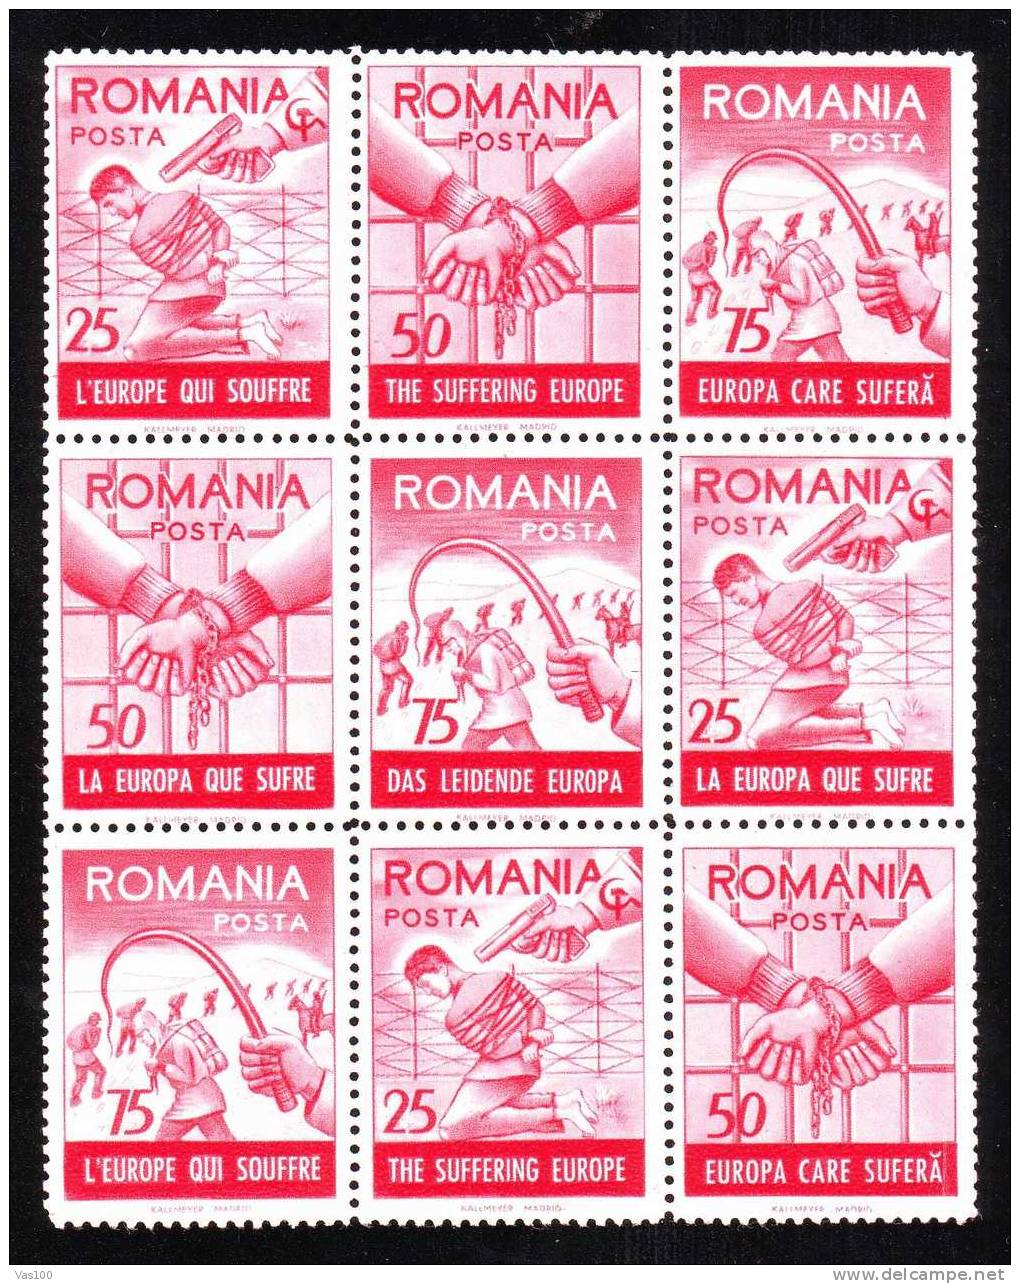 Romania  - Exiles 1958 THE SUFERING EUROPE ,minisheet Red 9 Stamps MNH. - Local Post Stamps